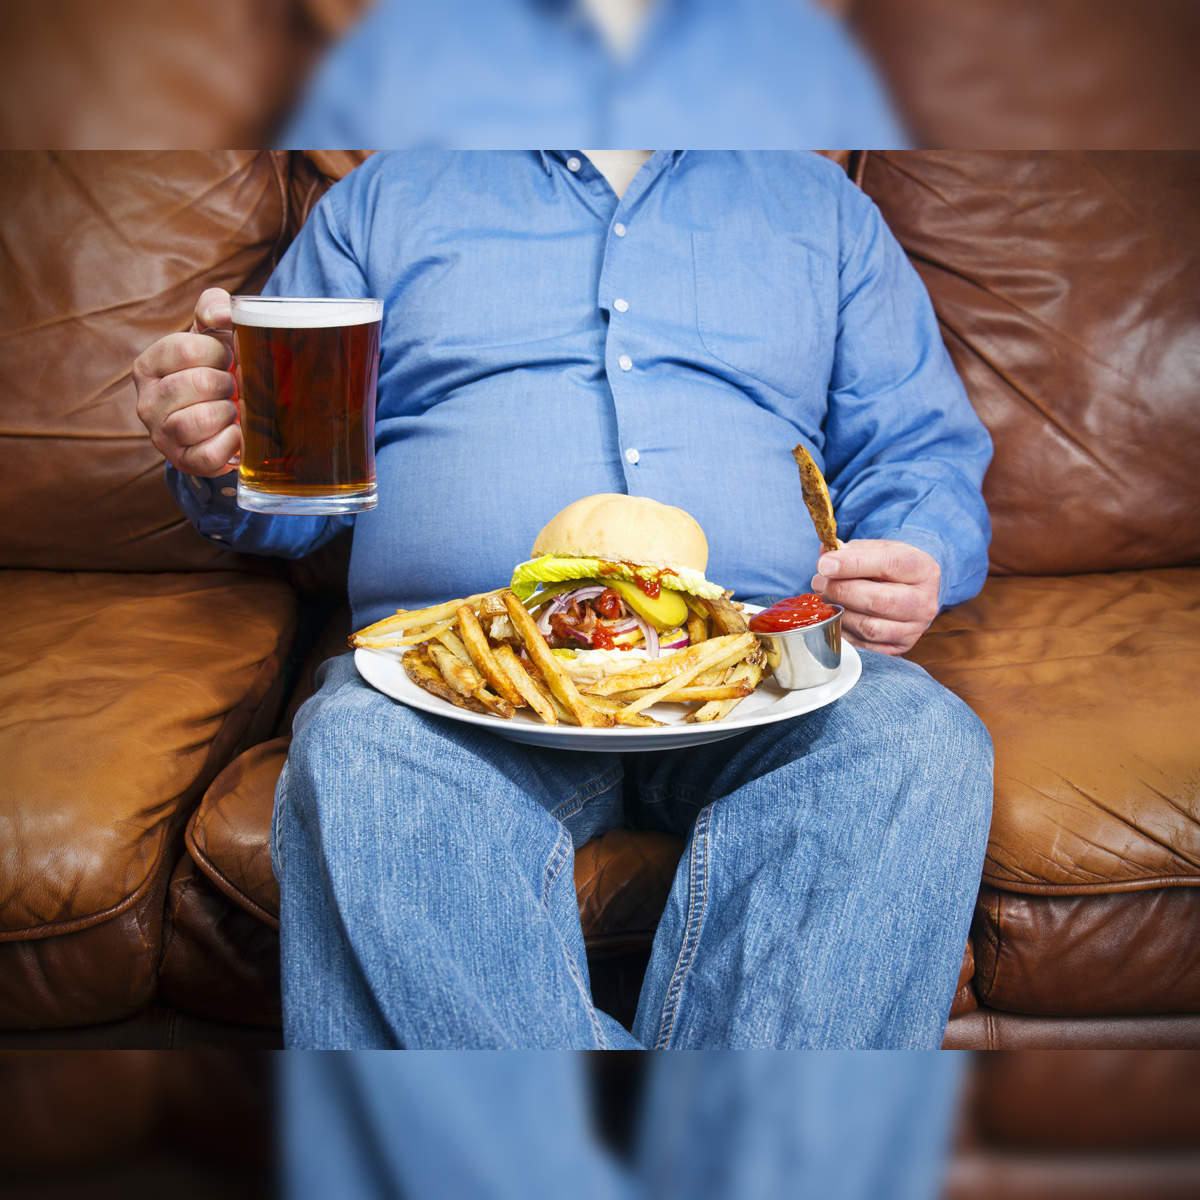 adult obesity: Unhealthy diet, lack of physical activities lead to